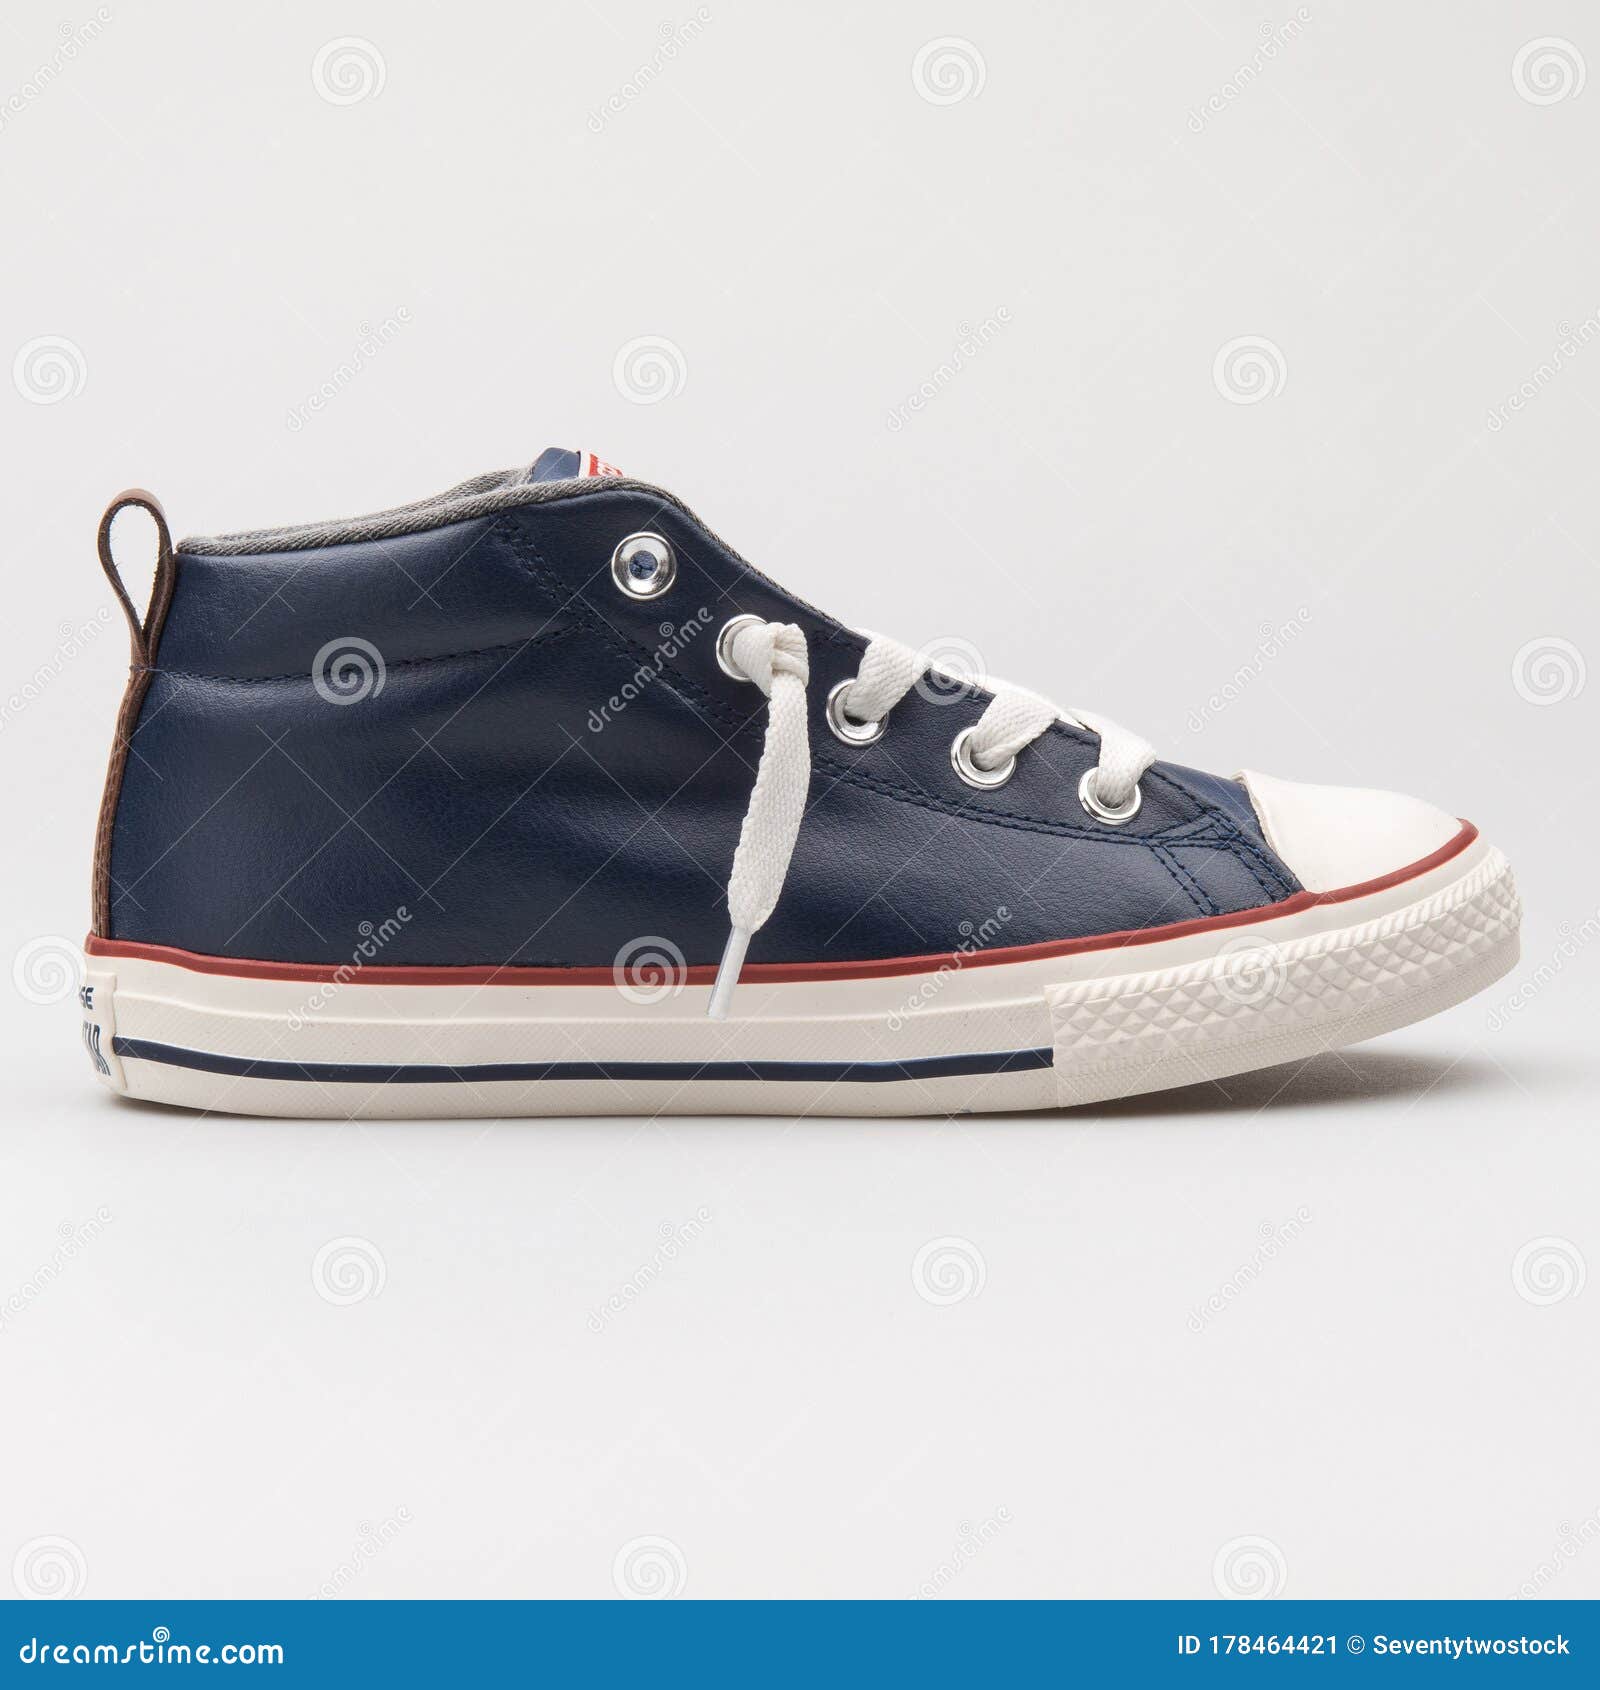 Converse Chuck Taylor All Star Street Mid Navy Blue Sneaker Editorial Photo  - Image of exercise, object: 178464421